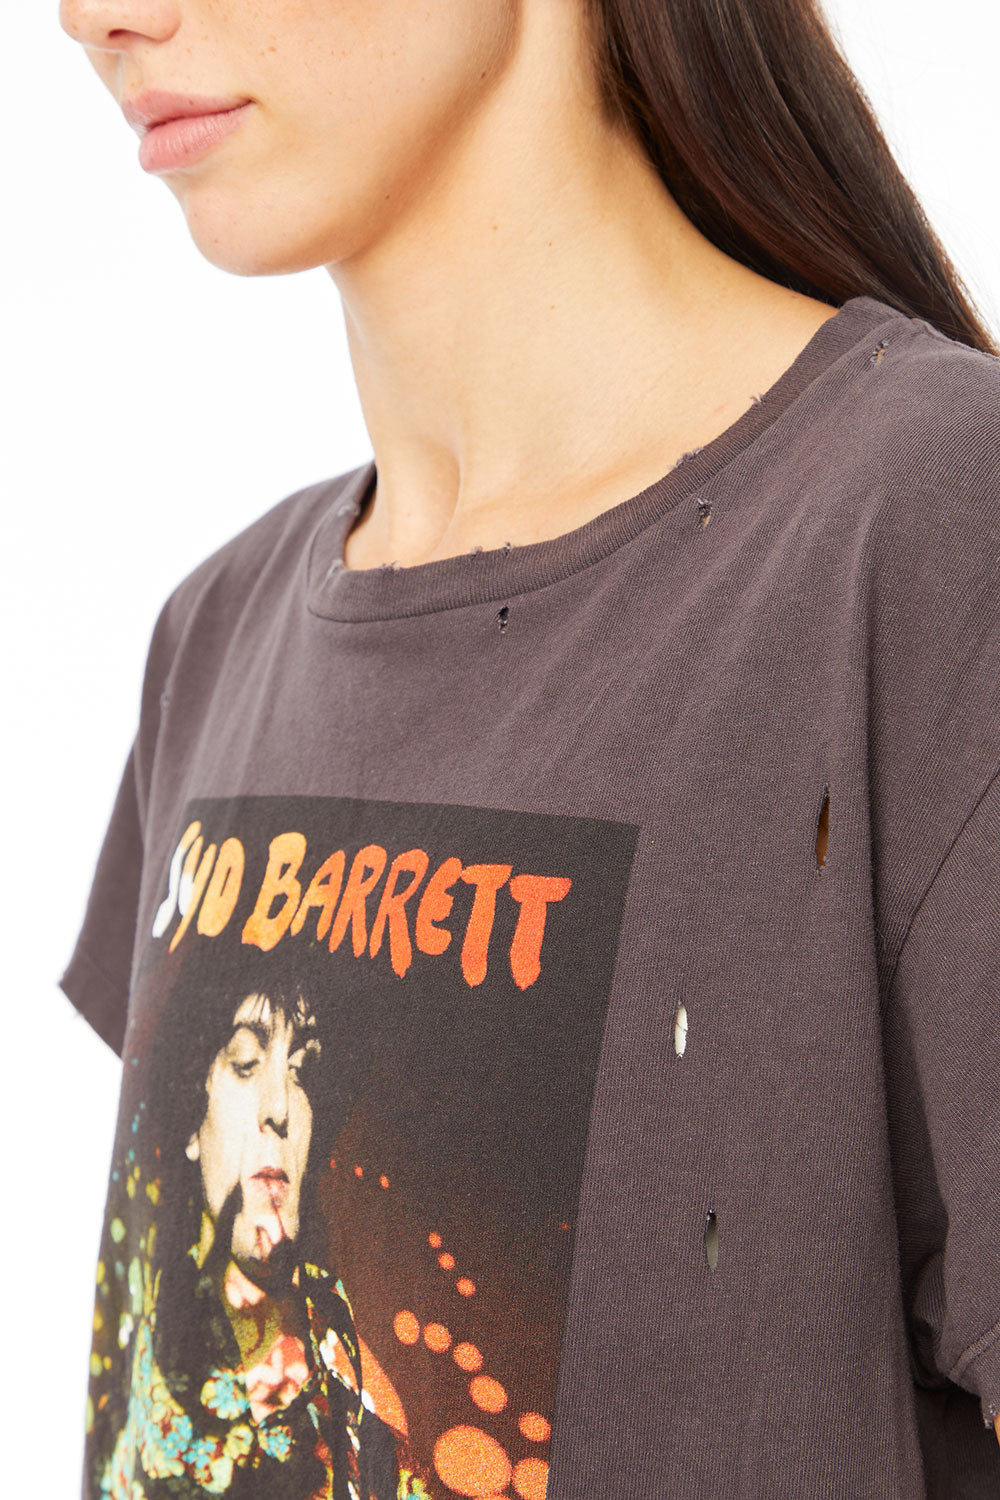 Syd Barrett - &quot;Syd Psychedelic&quot; Distressed Crew Neck WOMENS chaserbrand